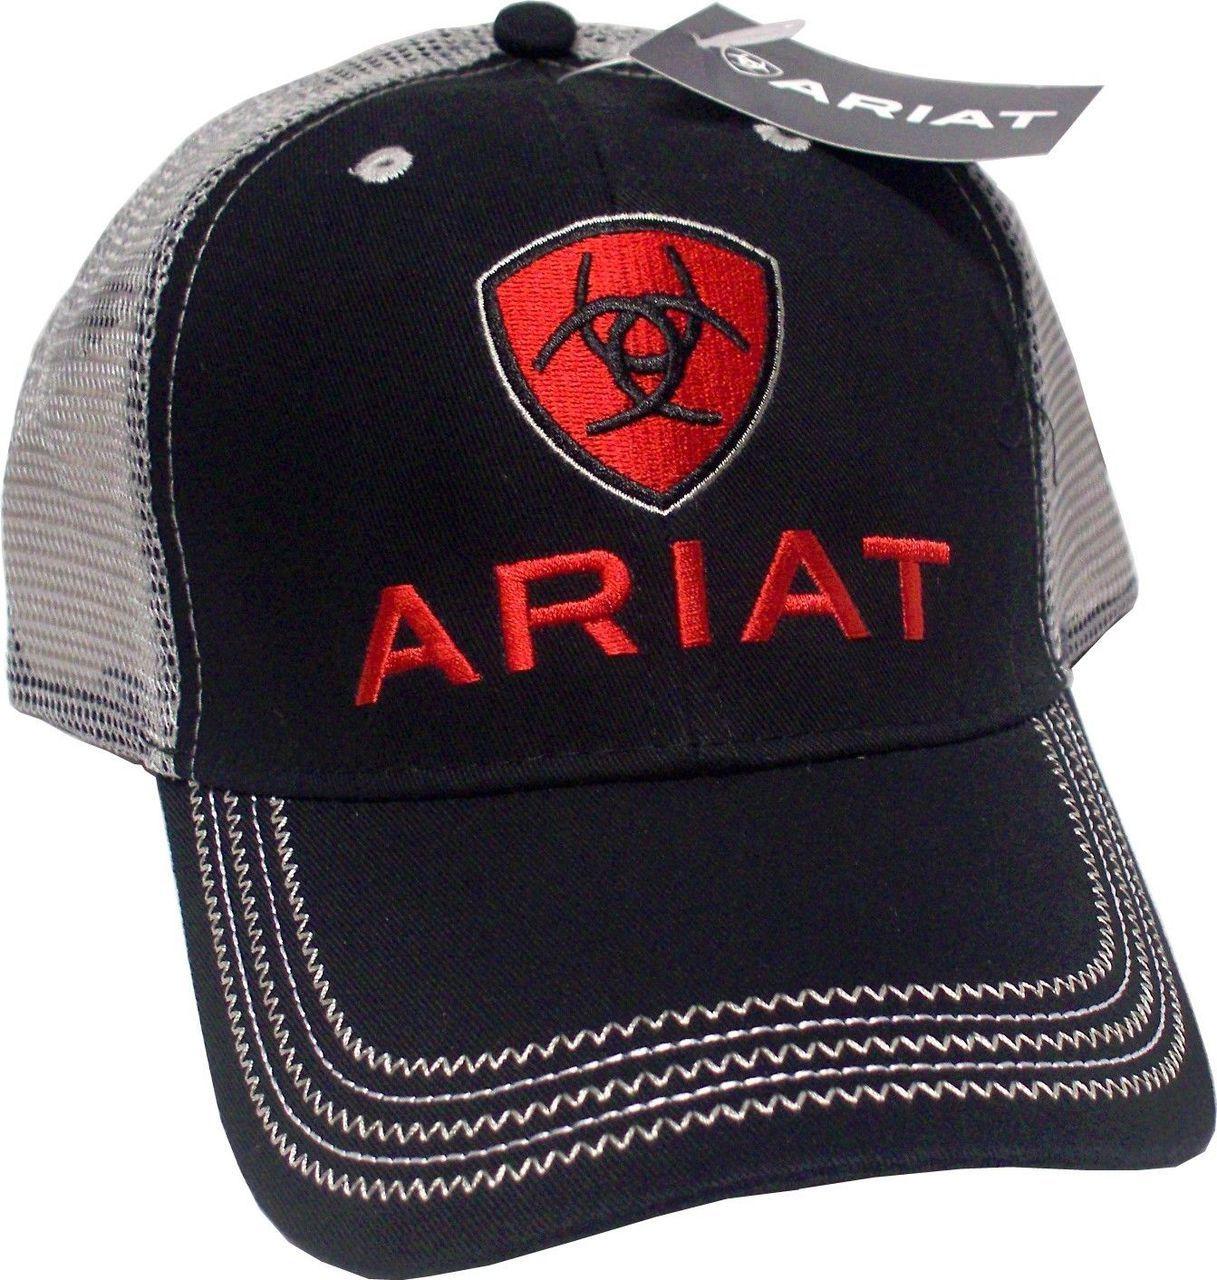 Red and Black Western Logo - Ariat Boots Logo Black Gray Red Mesh Backing Adjustable Snapback